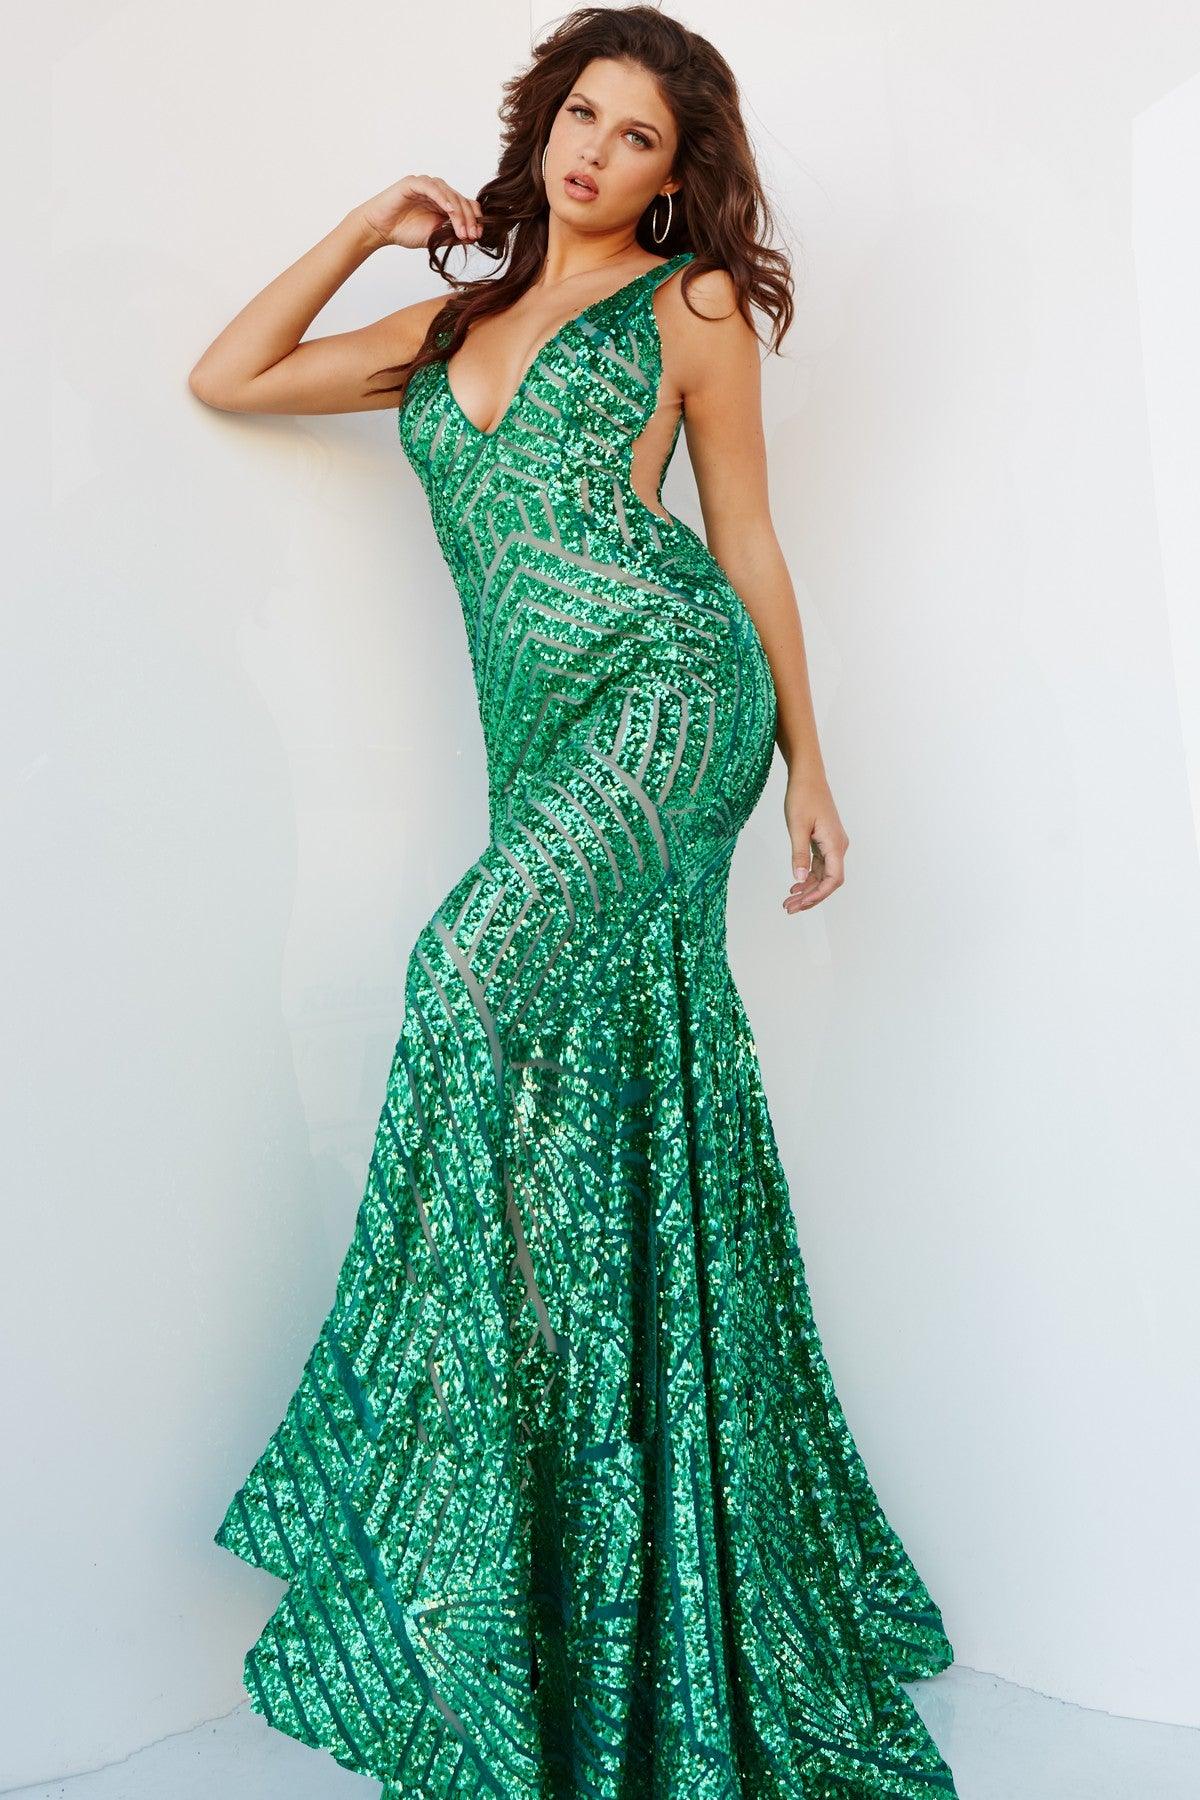 Prom Dresses Long Sleeveless Formal Mermaid Prom Gown Emerald